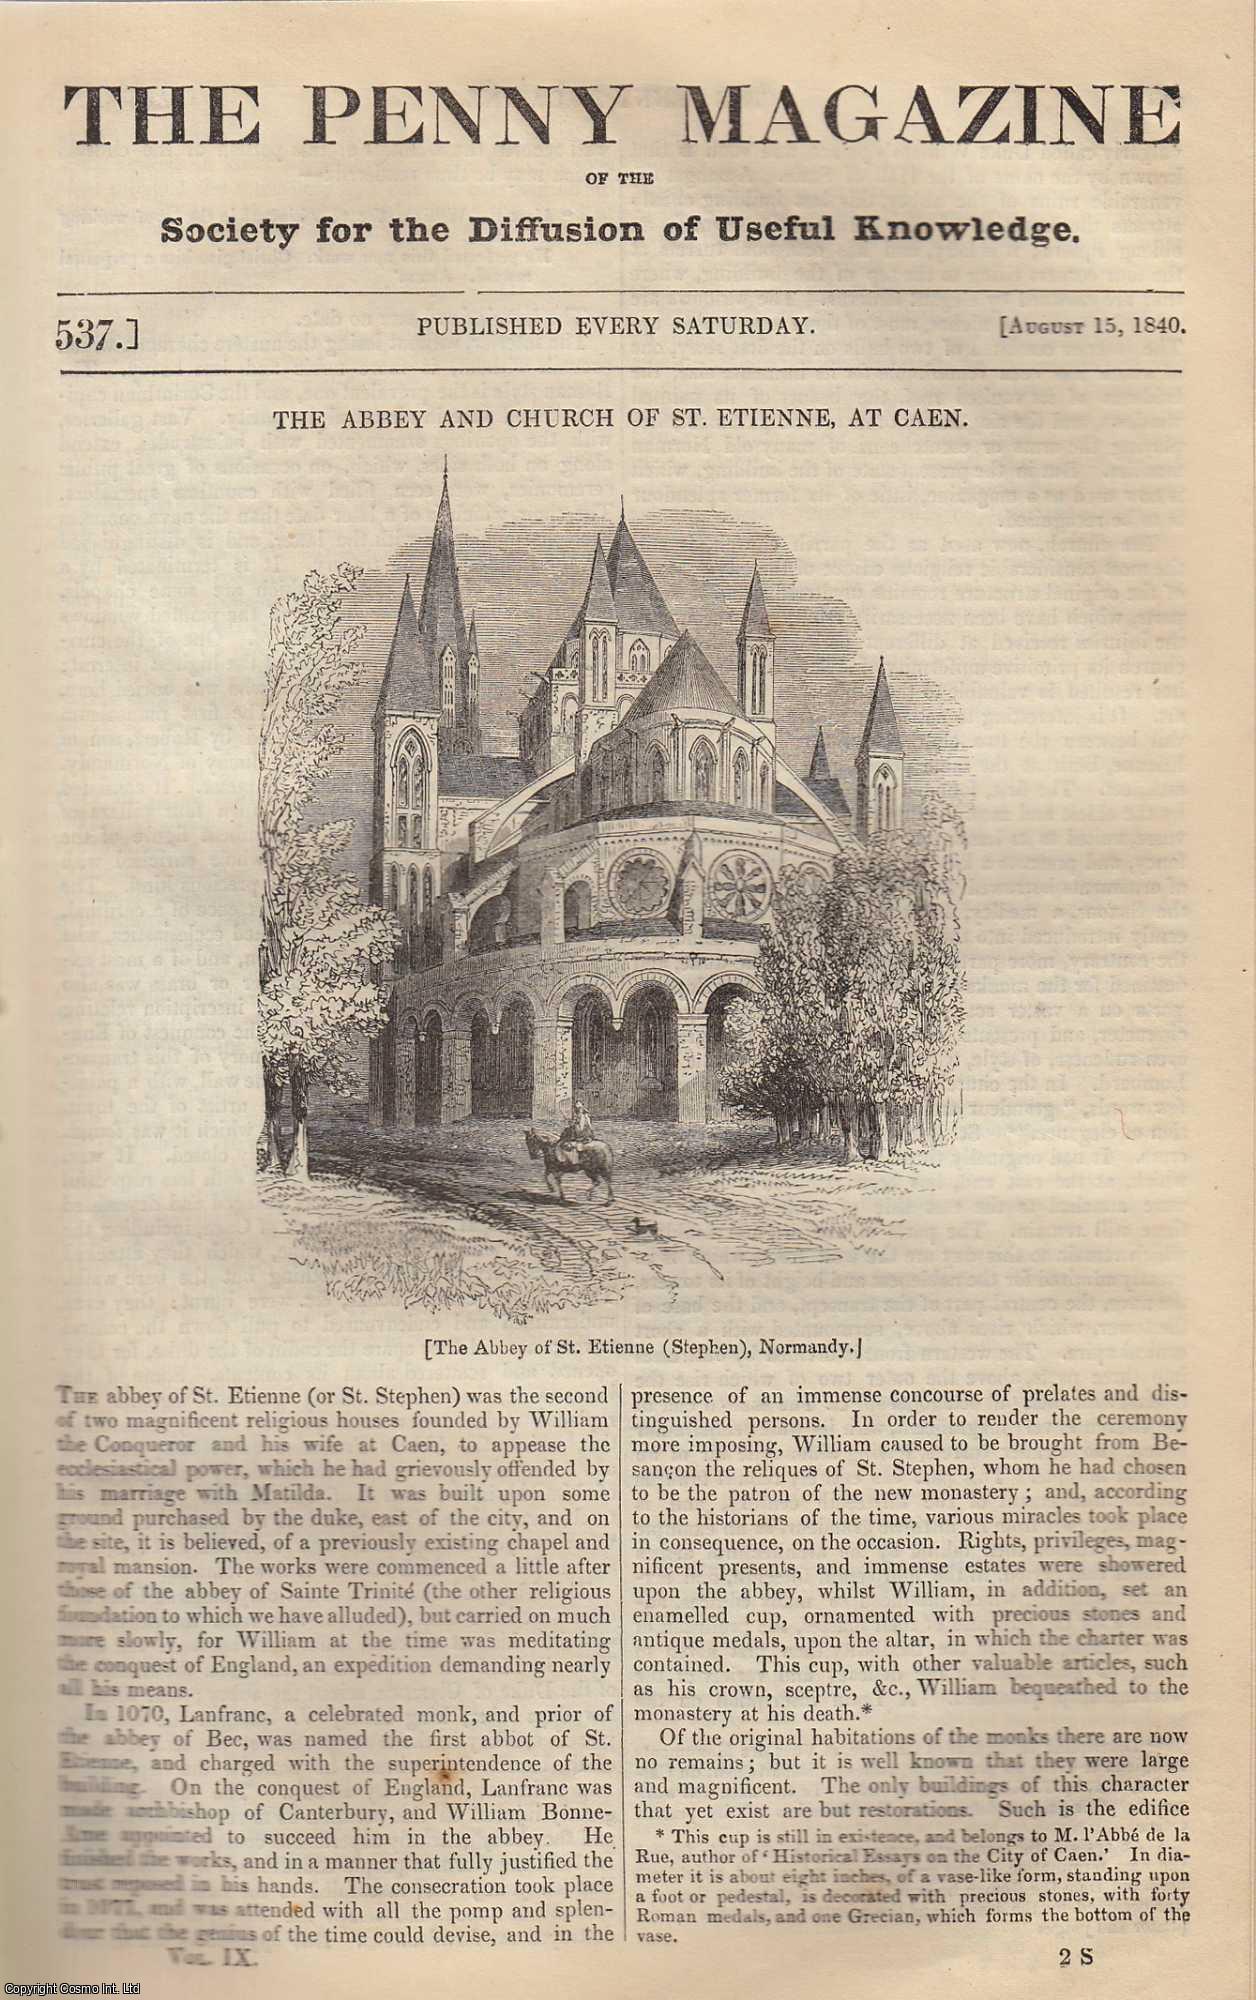 Penny Magazine - The Abbey and Church of St. Etienne, at Caen; Gamboge (A Tree); Druidical Remains (Part 3); Commerce of The Chinese; The Uses and The Manufacture of a Ship's Anchor (Part 1). Issue No. 537, August 15th, 1840. A complete original weekly issue of the Penny Magazine, 1840.